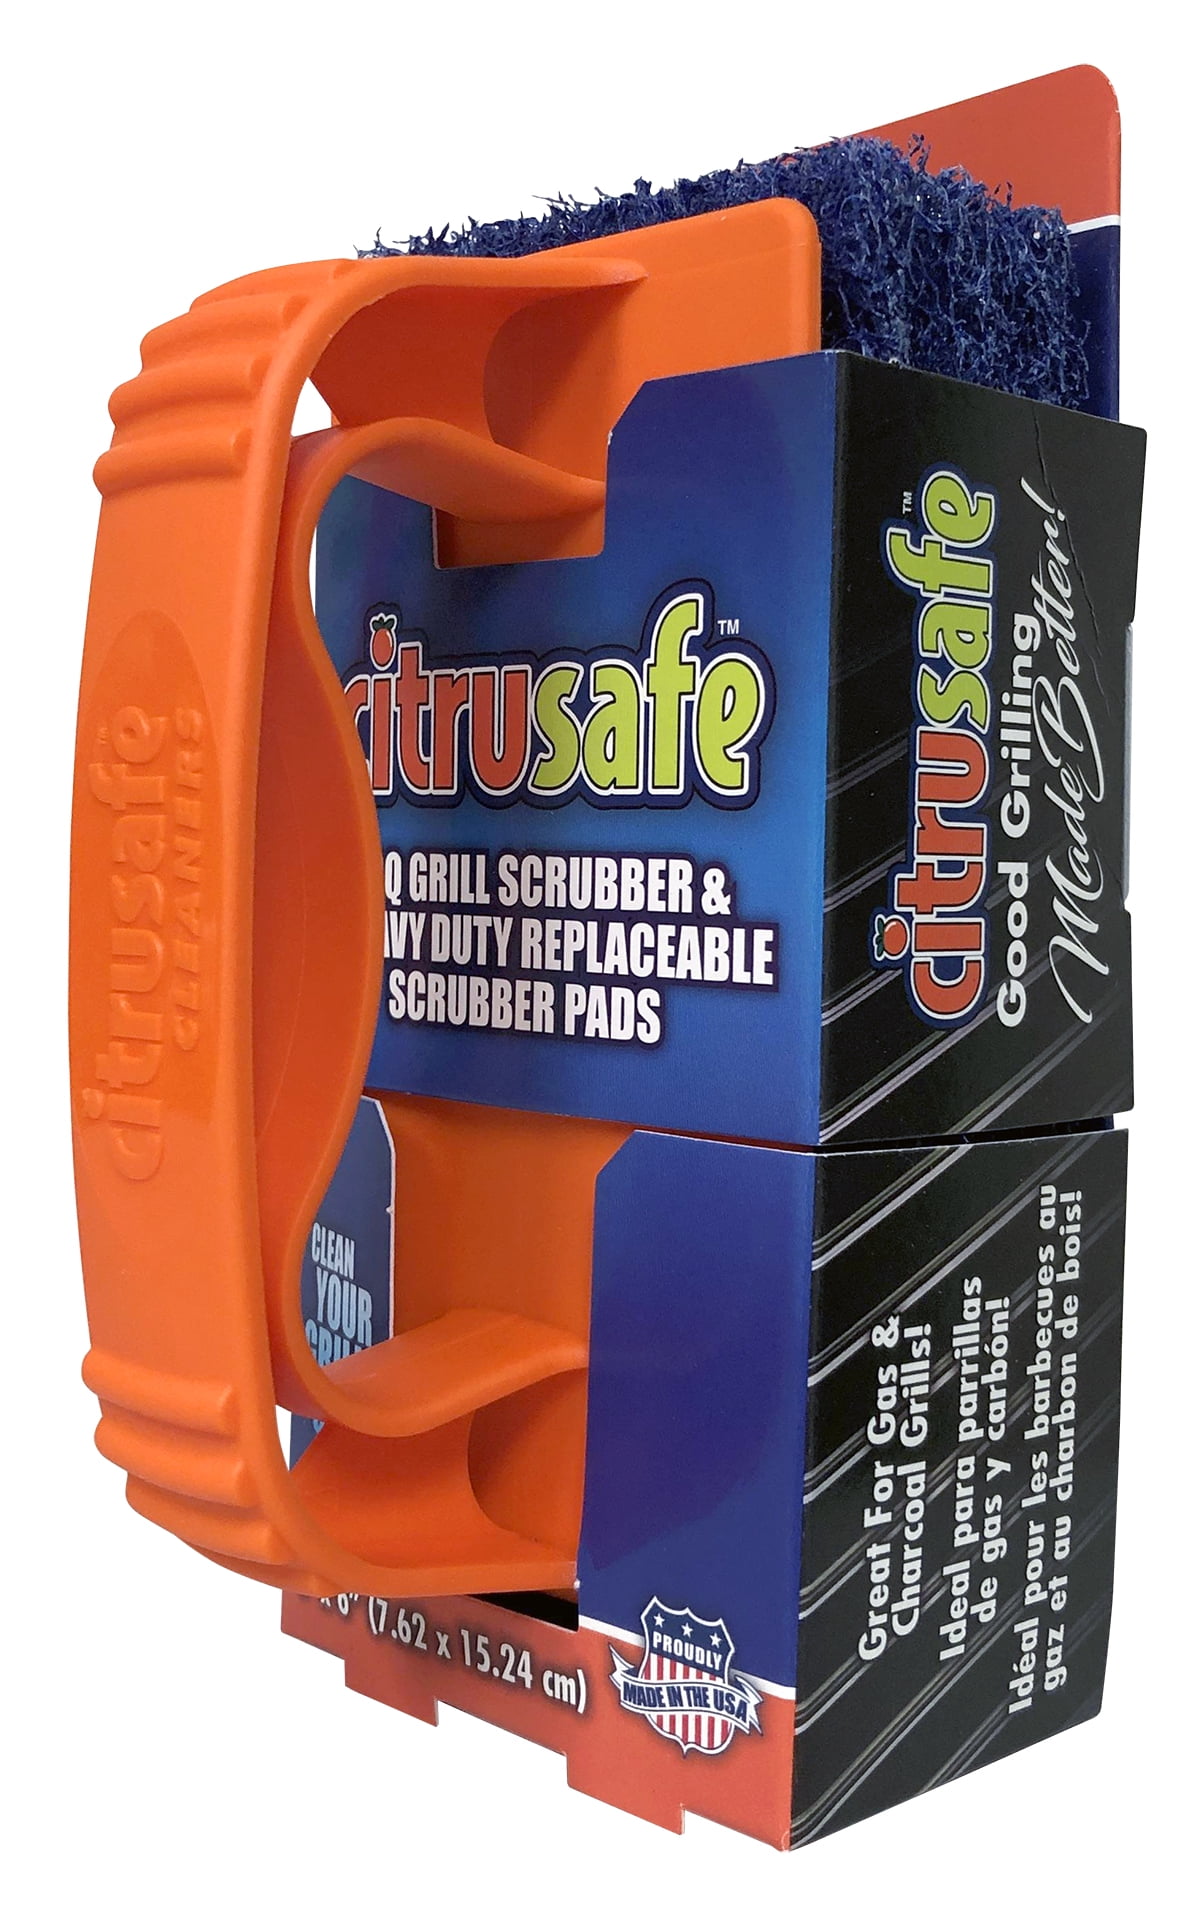 Bull Grill Parts: Citrusafe Complete Grill Cleaning Care Kit